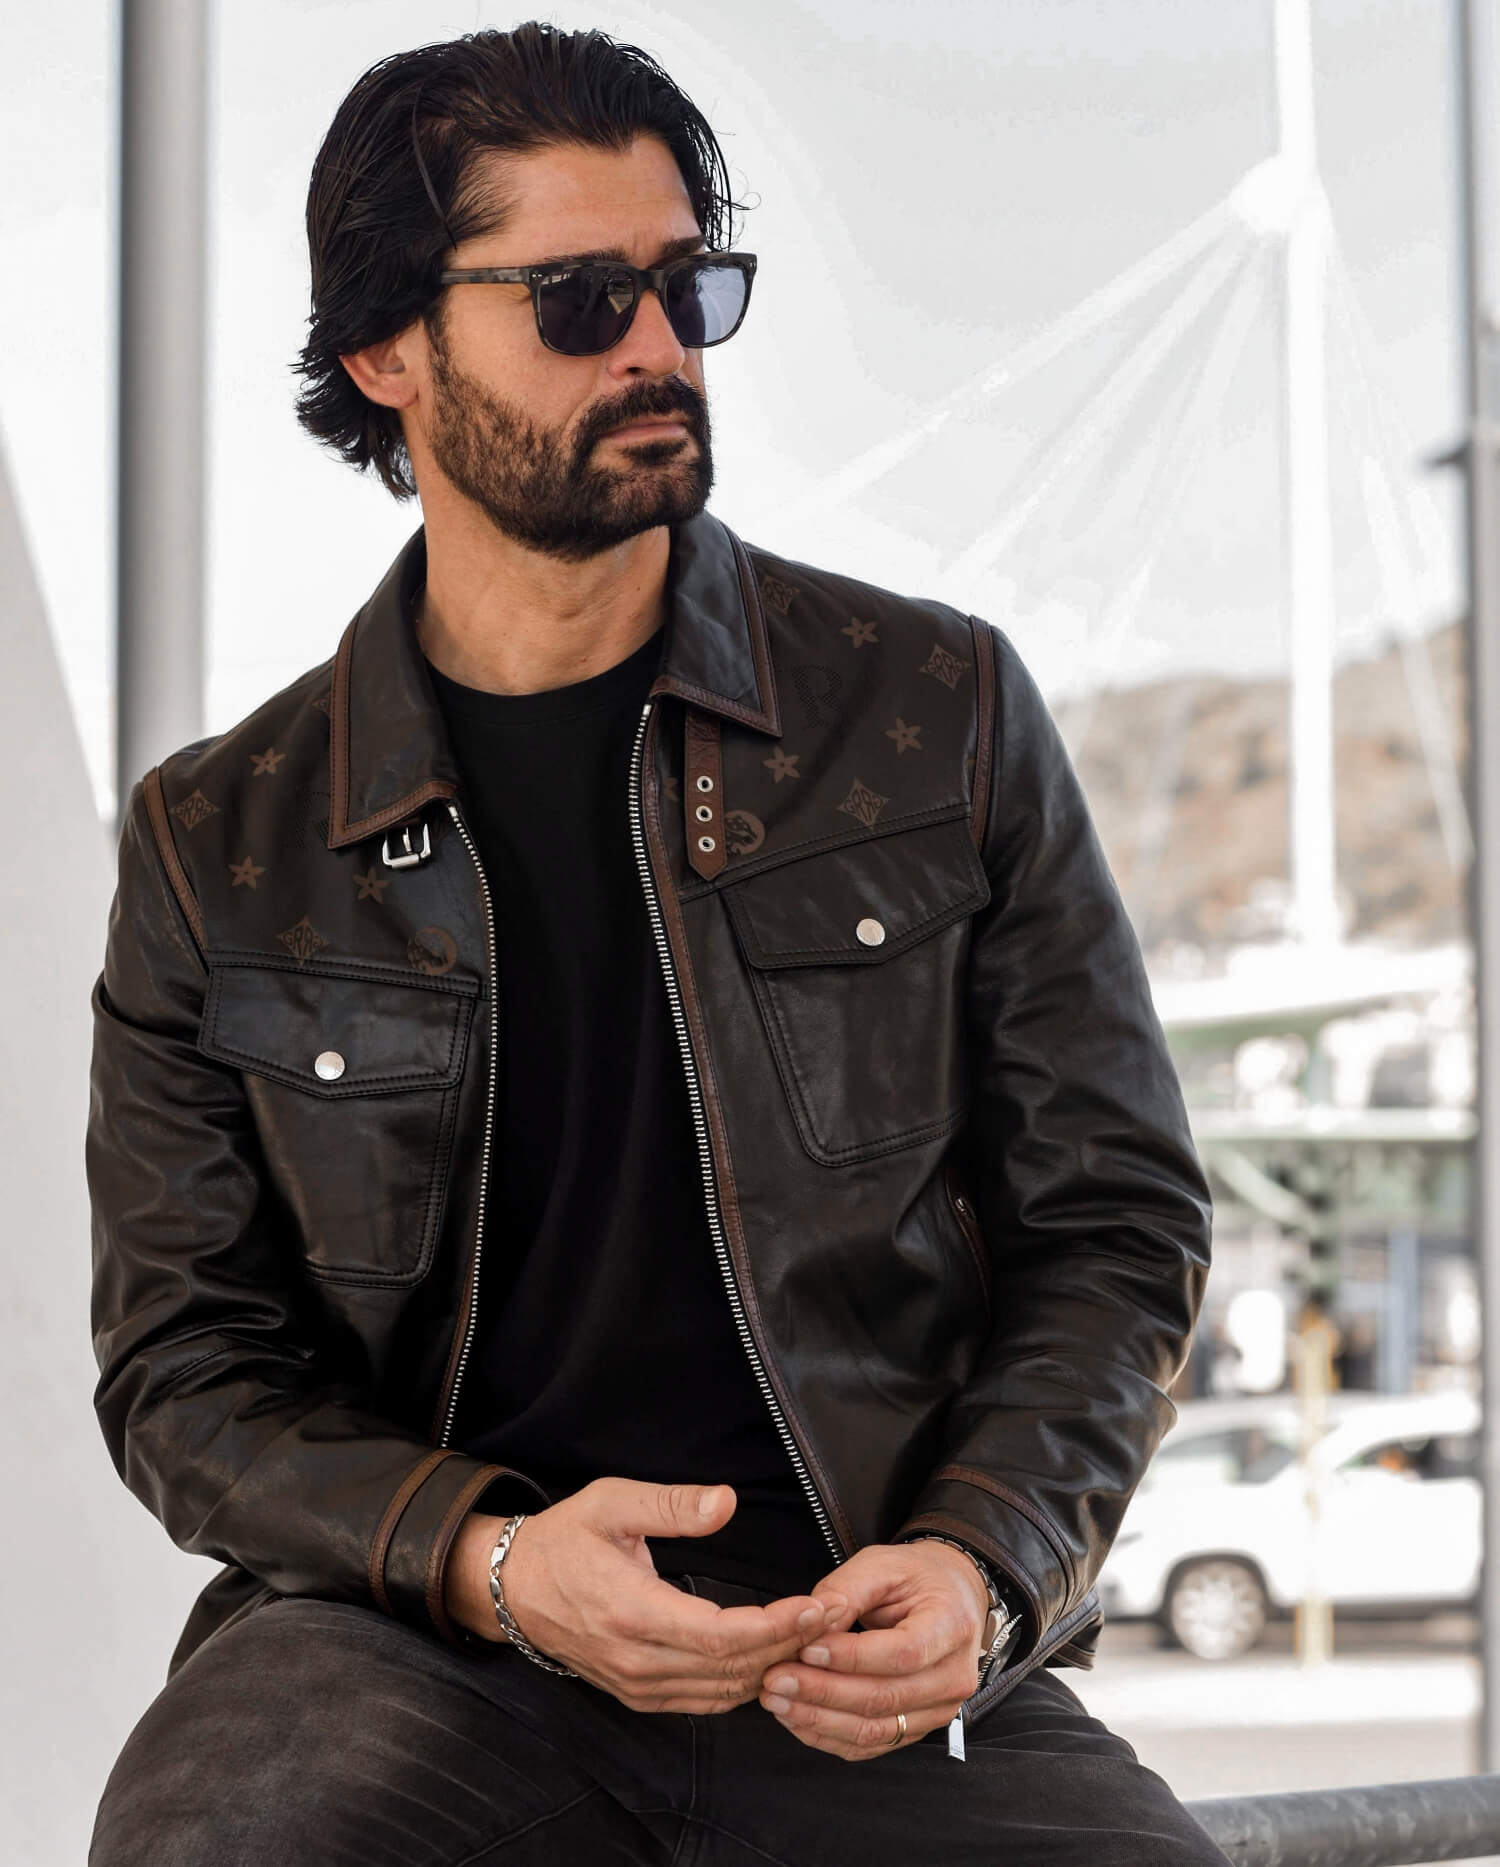 Black Leather Biker Jacket with Red Short Sleeve Shirt Outfits For Men (7  ideas & outfits)